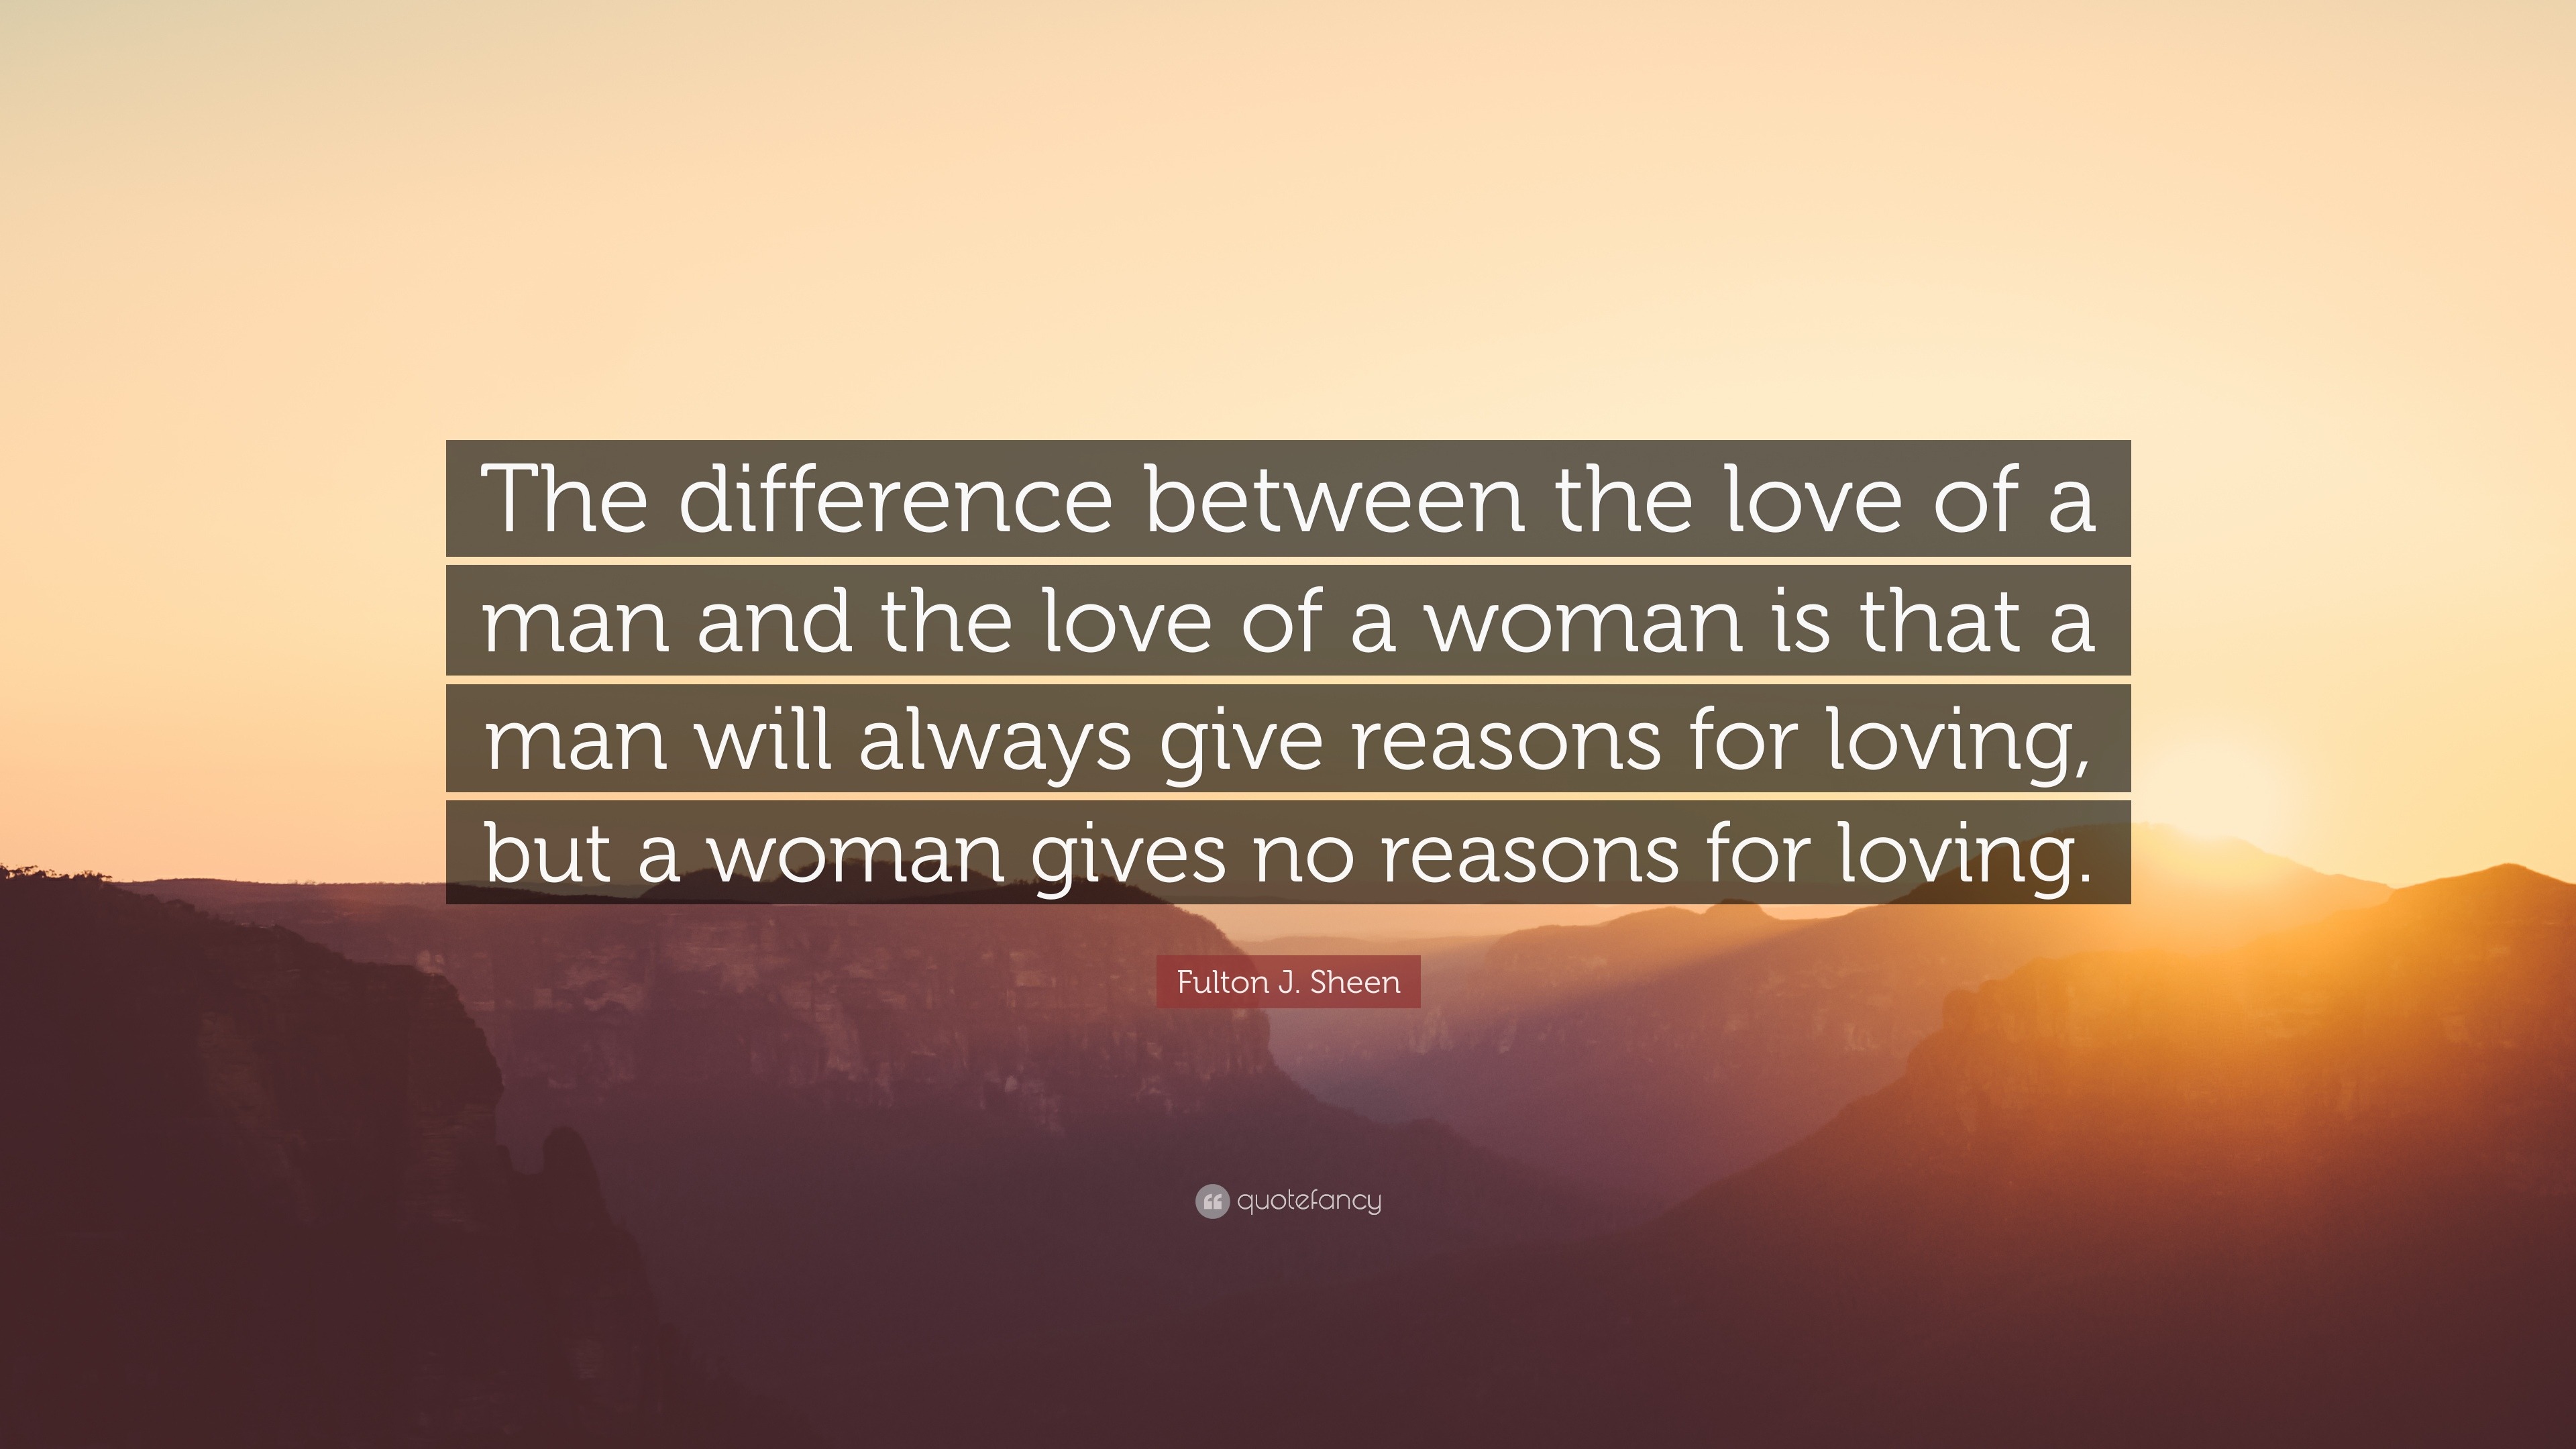 Fulton J Sheen Quote “The difference between the love of a man and